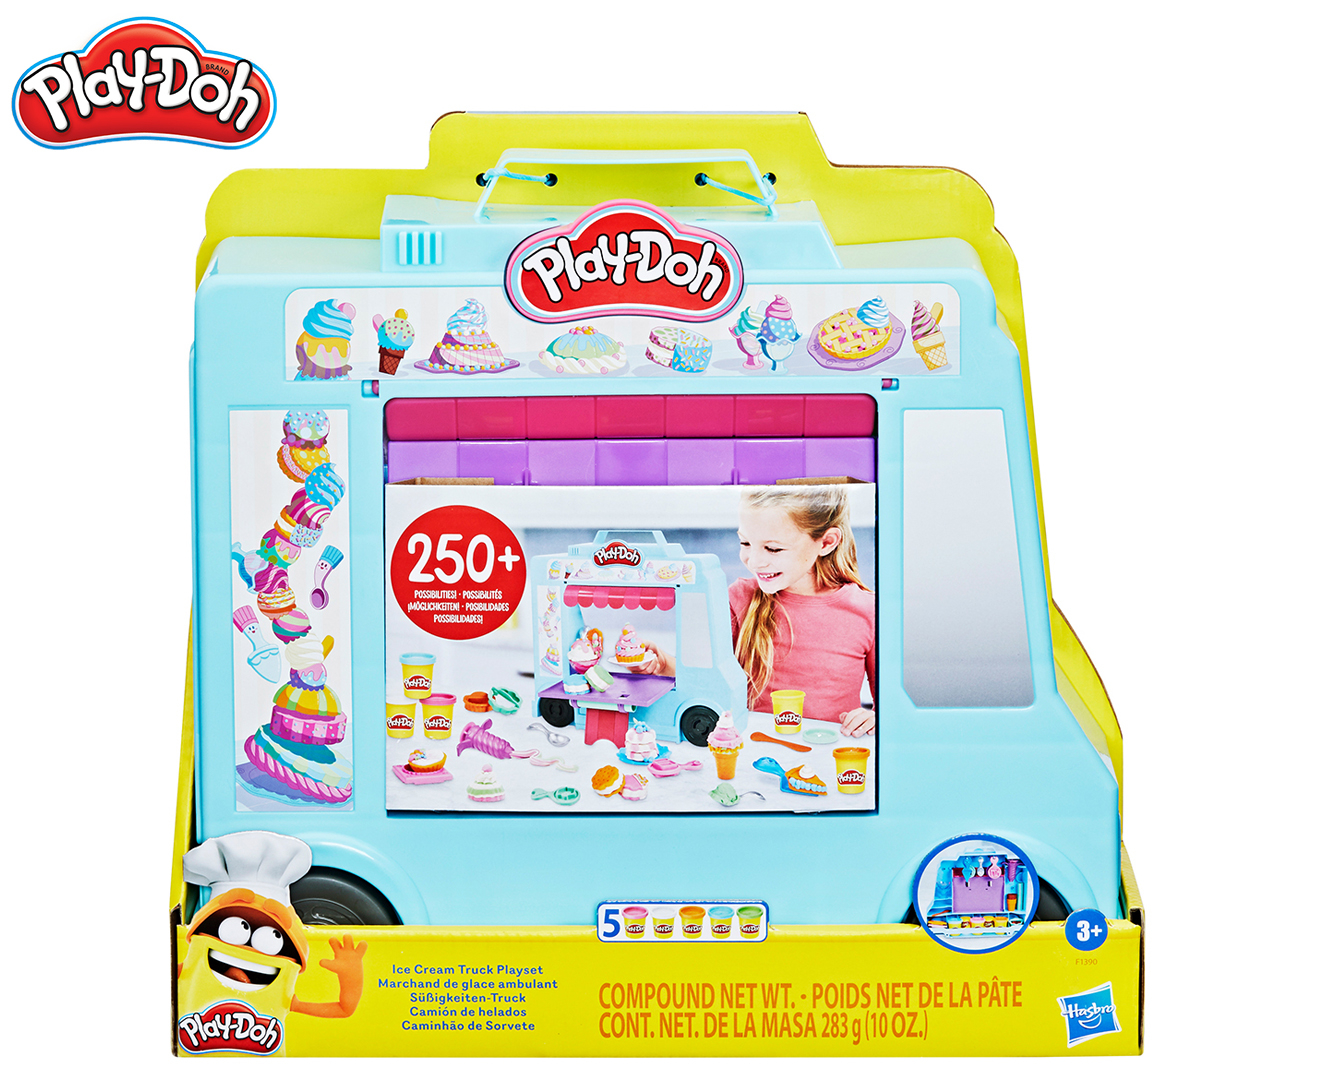 Play-Doh Kitchen Creations Rising Cake Oven Playset Review 2021